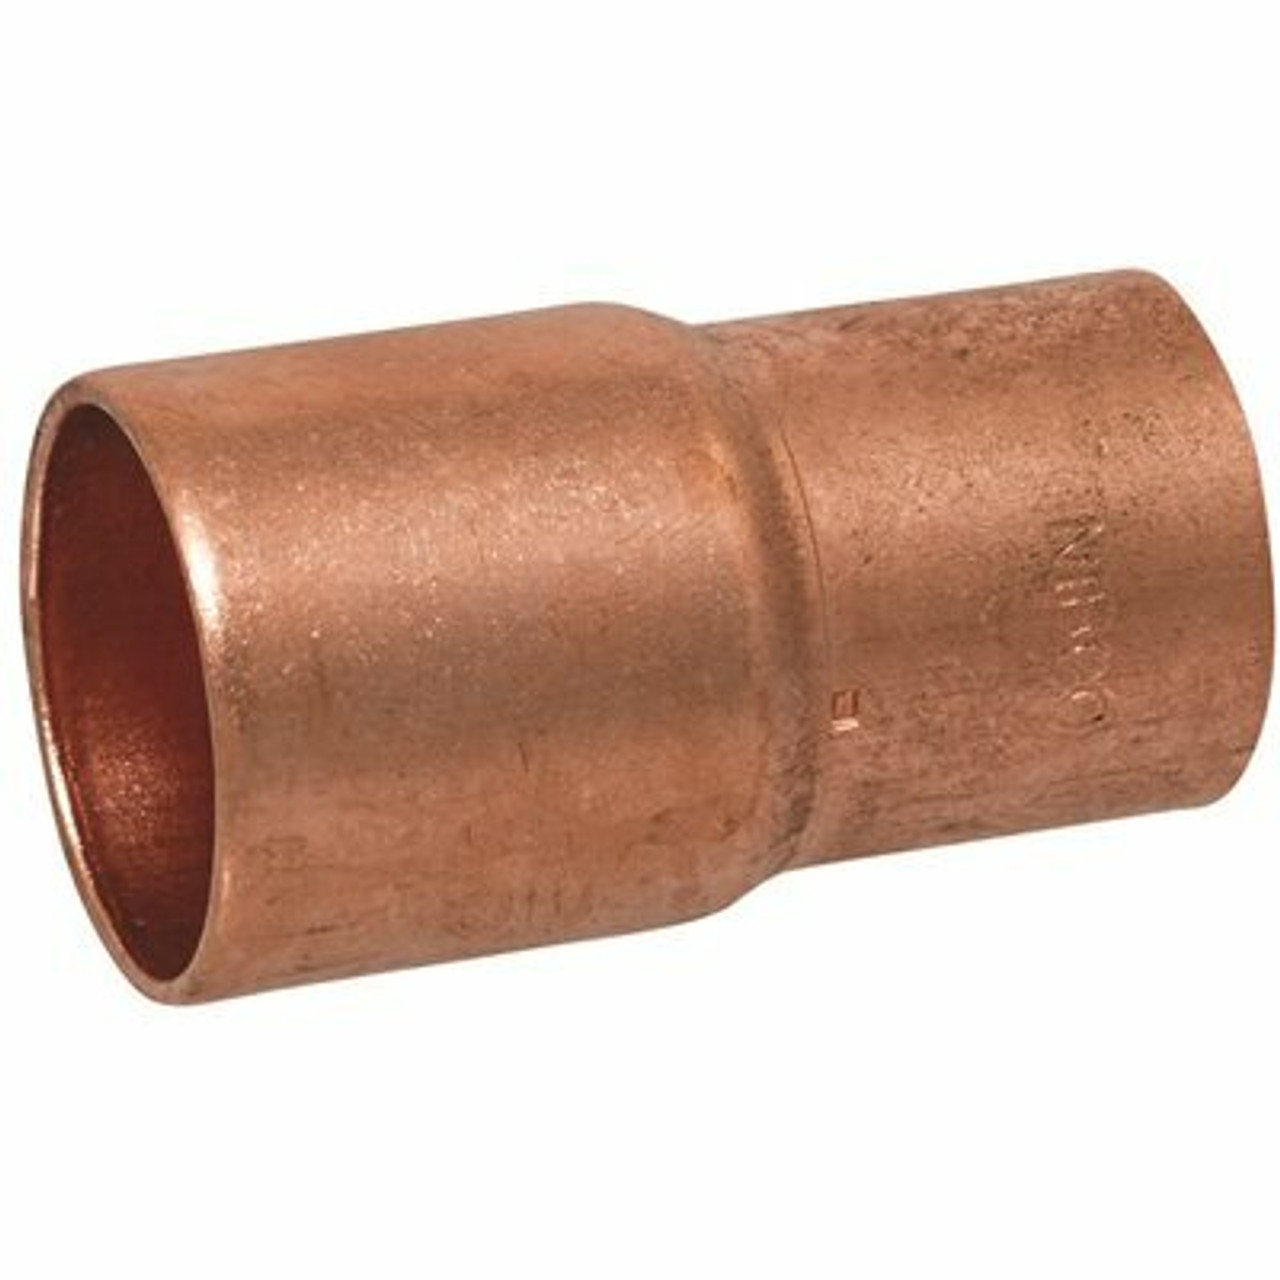 Nibco 1 In. X 3/4 In. Ftg X Cup Copper Pressure Fitting Reducer